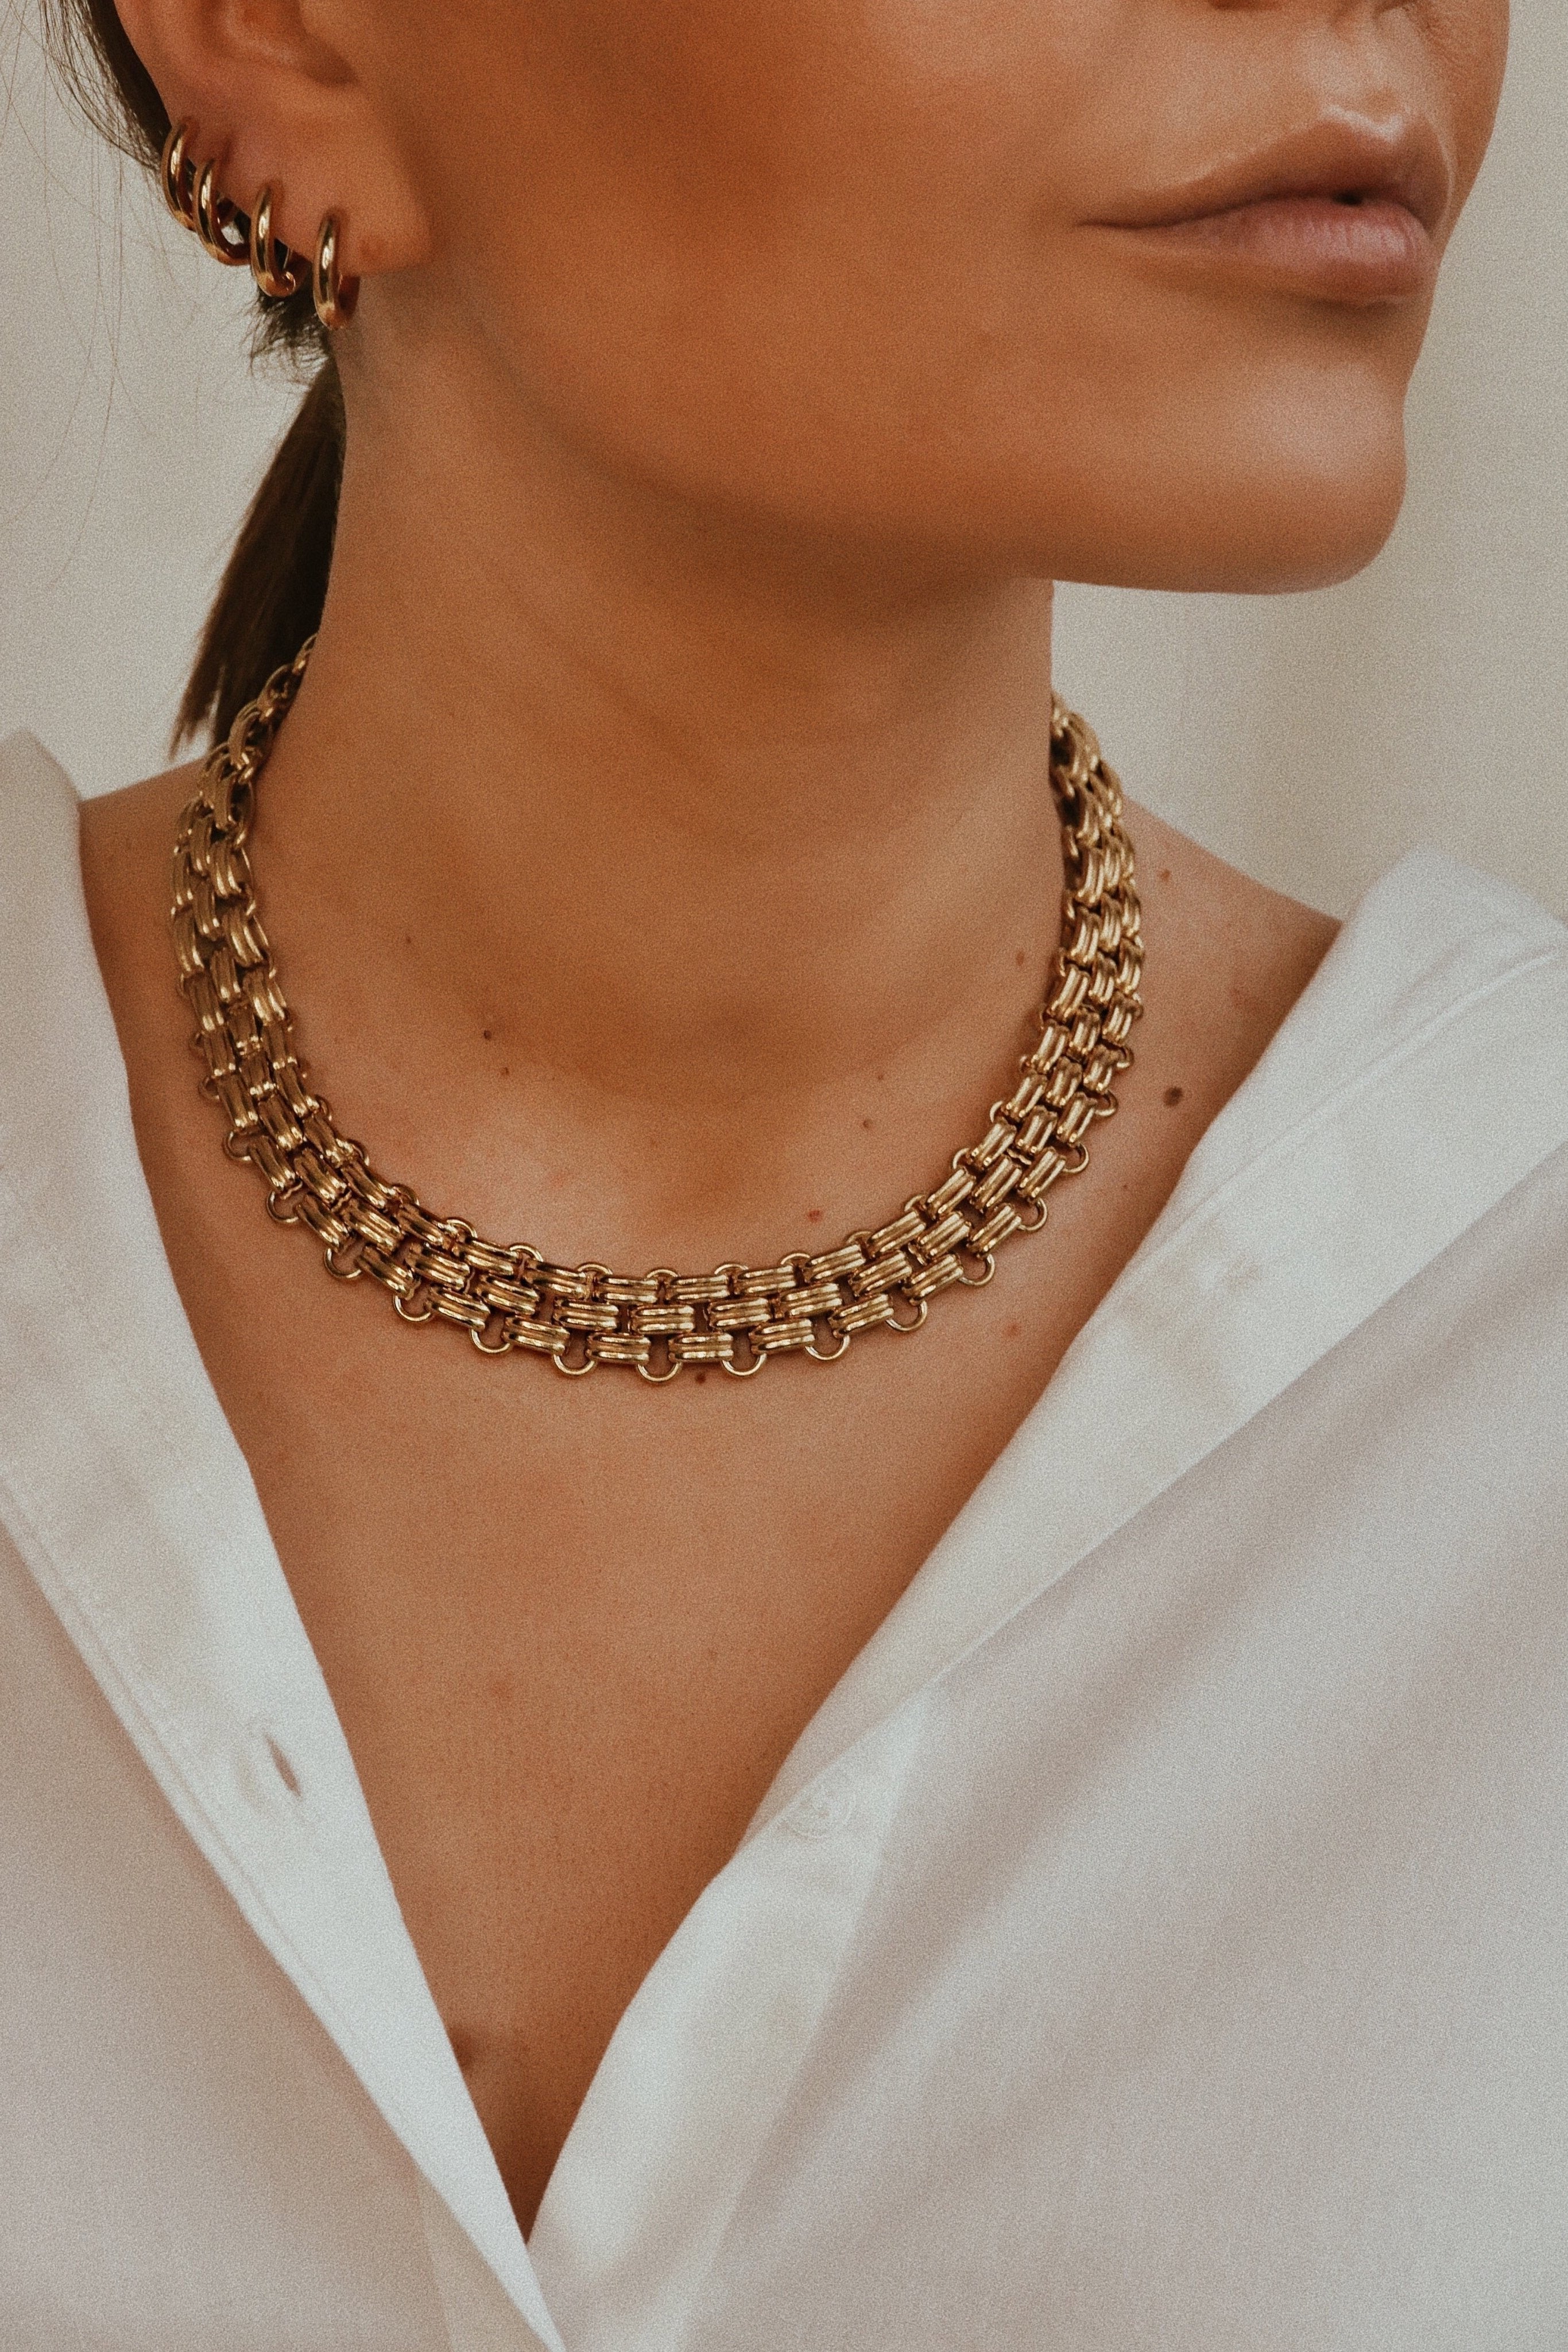 Genova Necklace - Boutique Minimaliste has waterproof, durable, elegant and vintage inspired jewelry